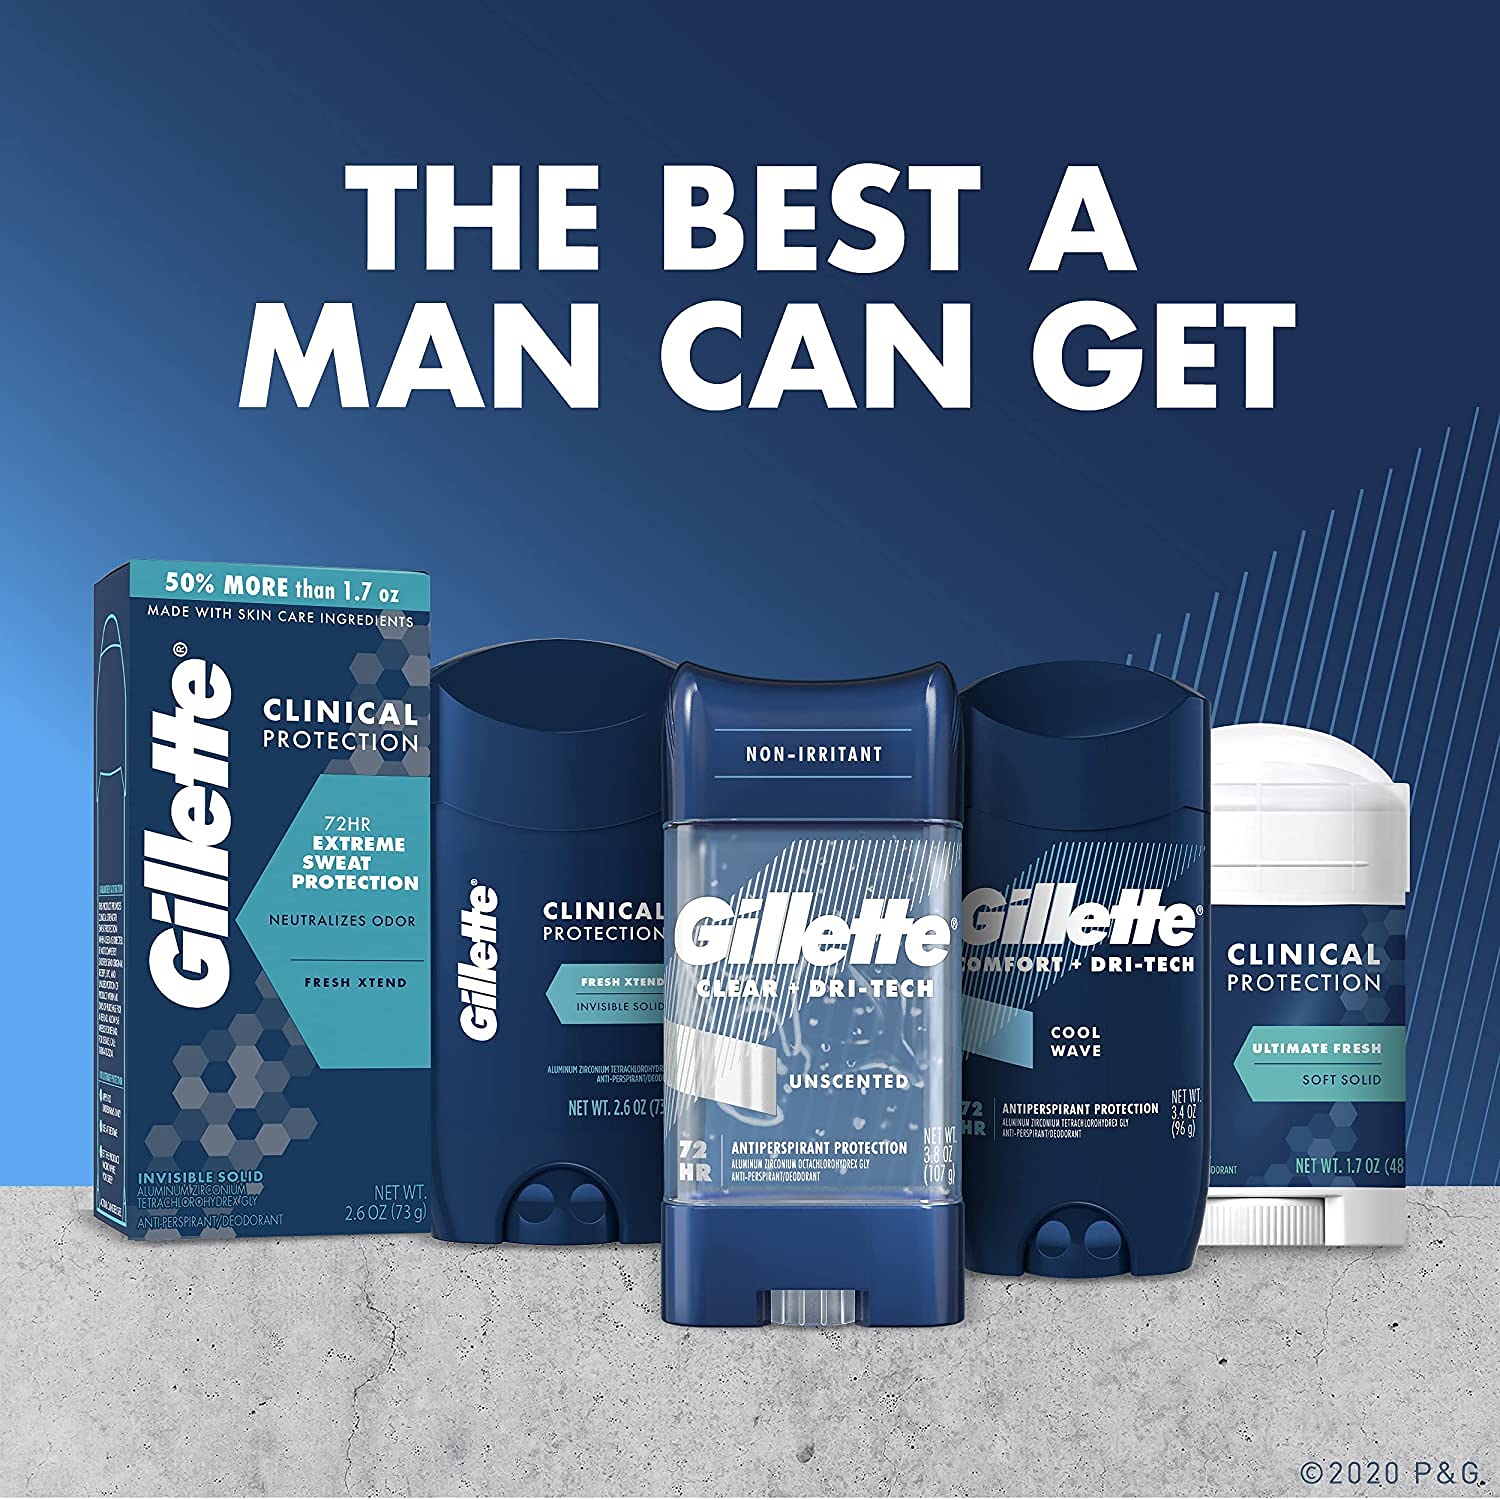 Gillette Clinical Advanced Solid for Long Lasting Sweat Protection, Ultimate Fresh, 2.6 Ounce, Mens Razors / Blades